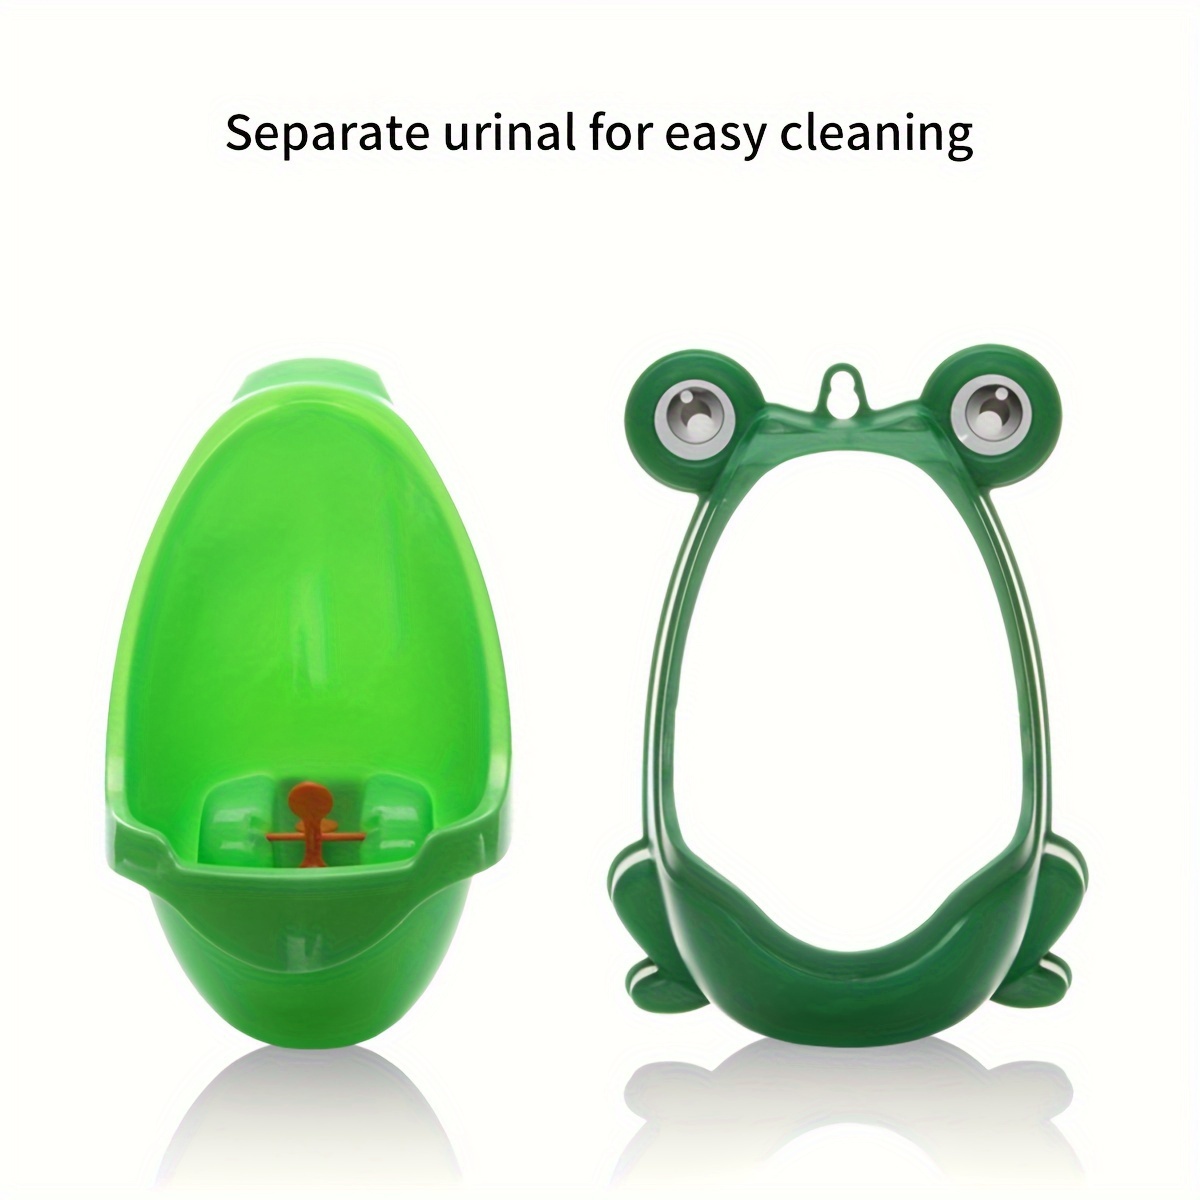 1pc frog shaped potty training urinal wall mounted polypropylene material kid friendly design with whirling target easy   7 08x6 29x10 62 inches details 5